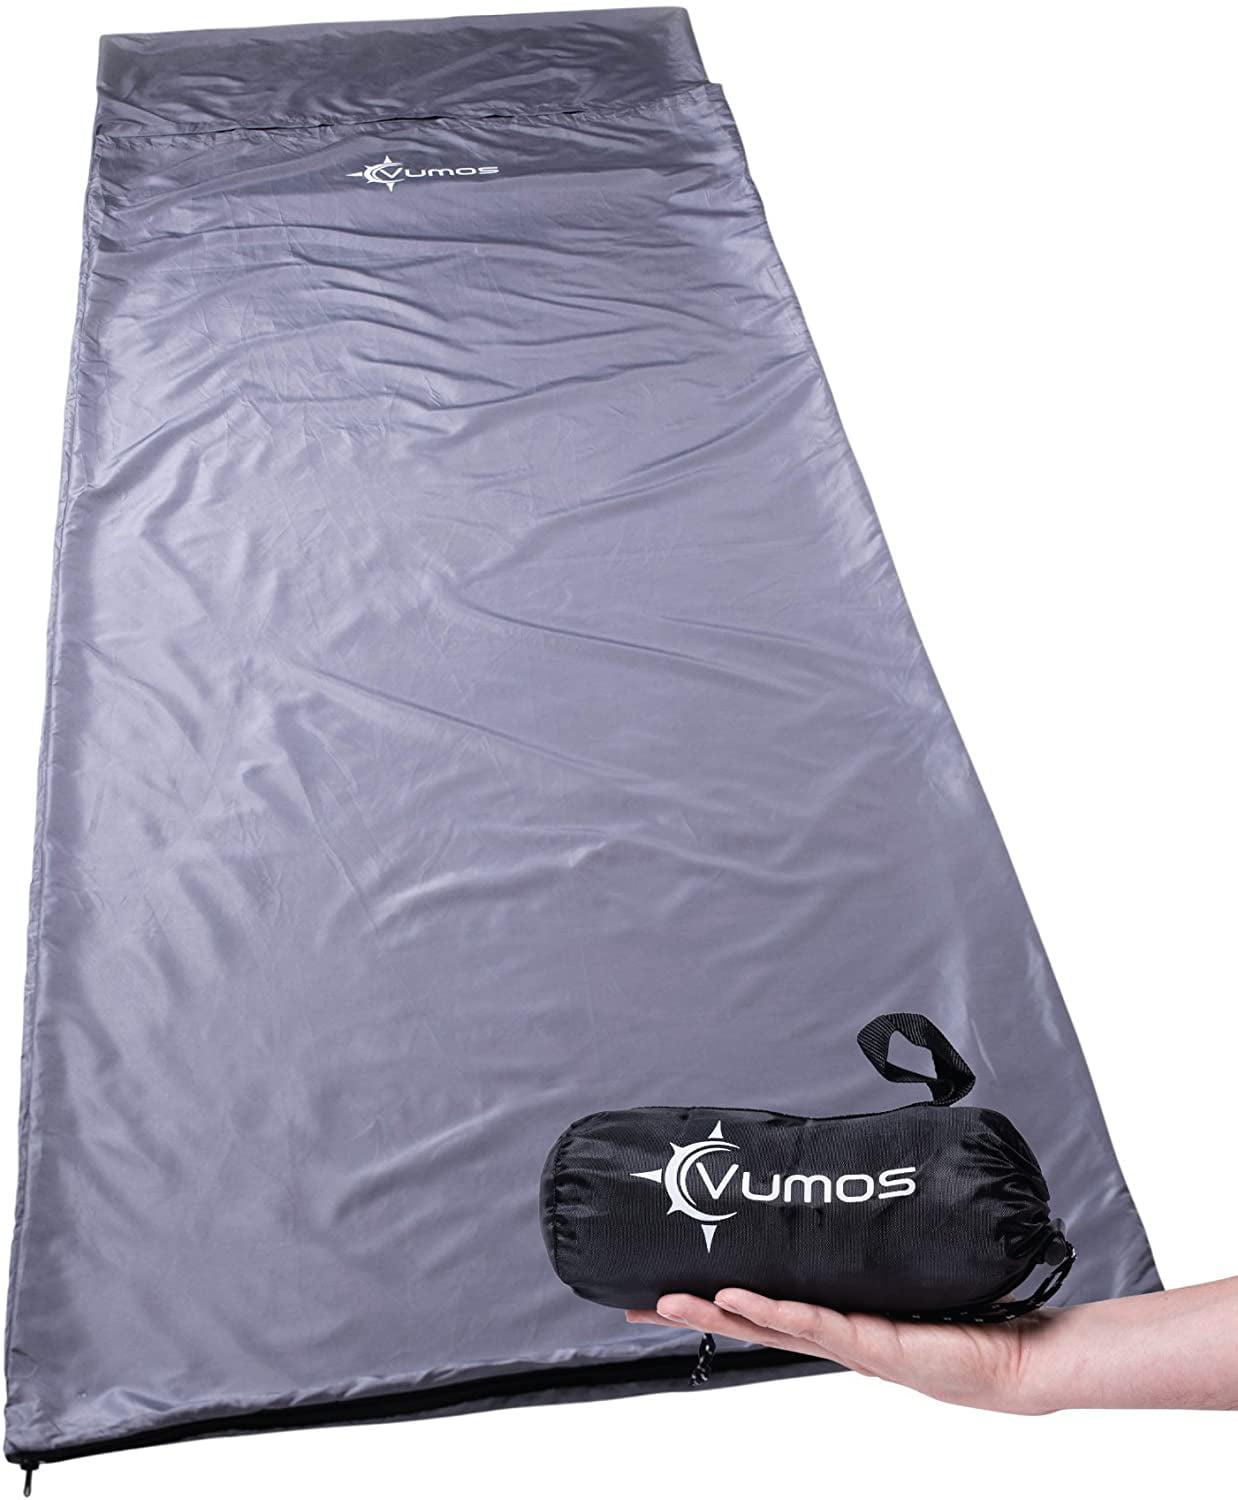 EBUTY Sleeping Bag Liner Lightweight Sleeping Sheet Perfect for Traveling and Camping Pink